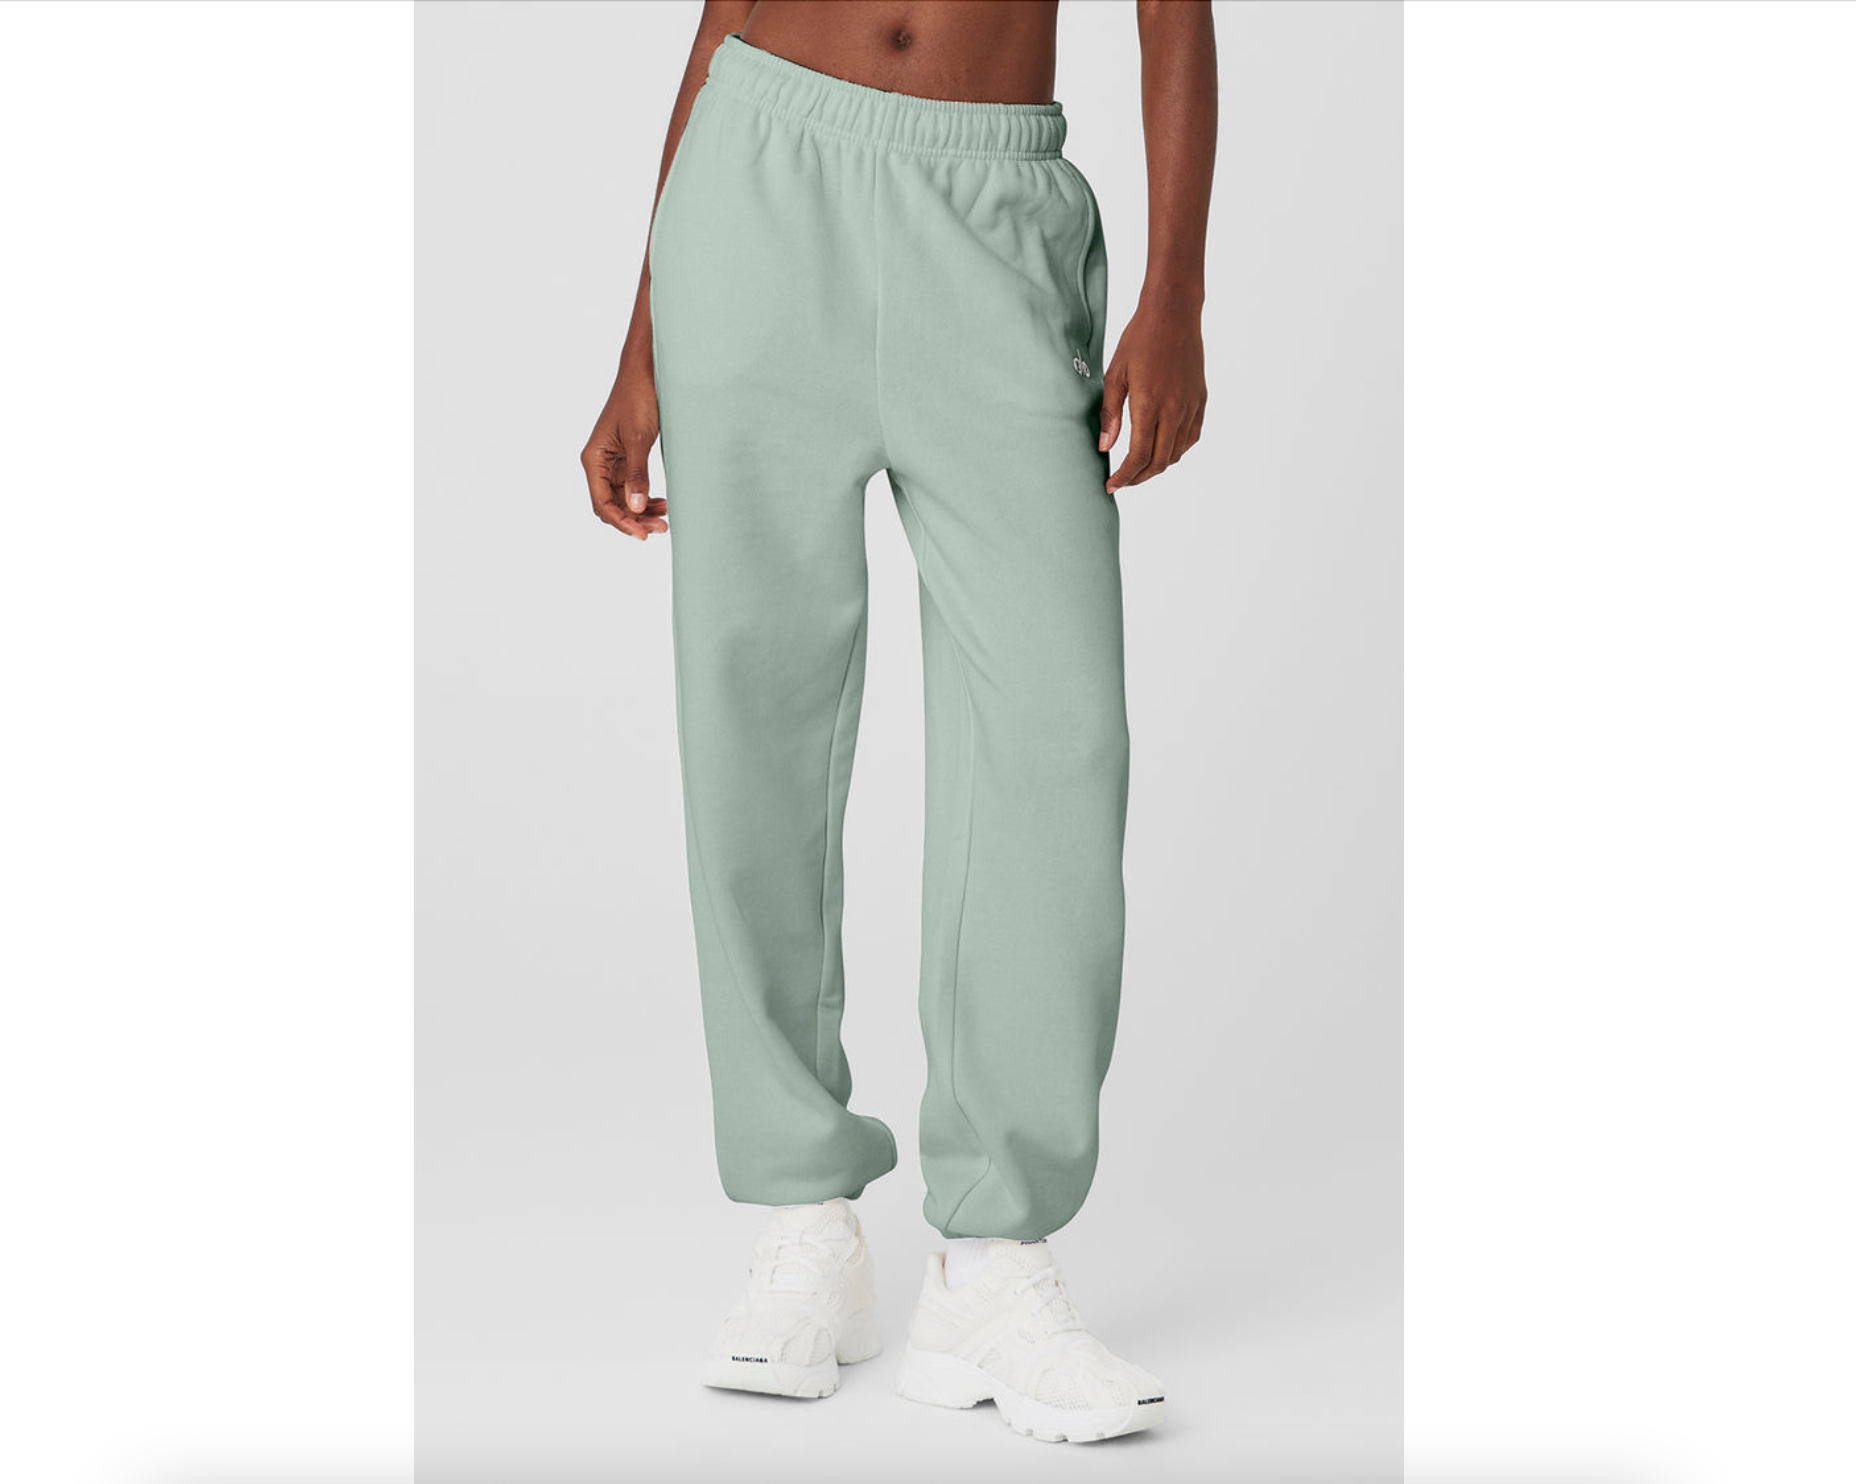 The Best Sweatpants For Women Who Love Comfort